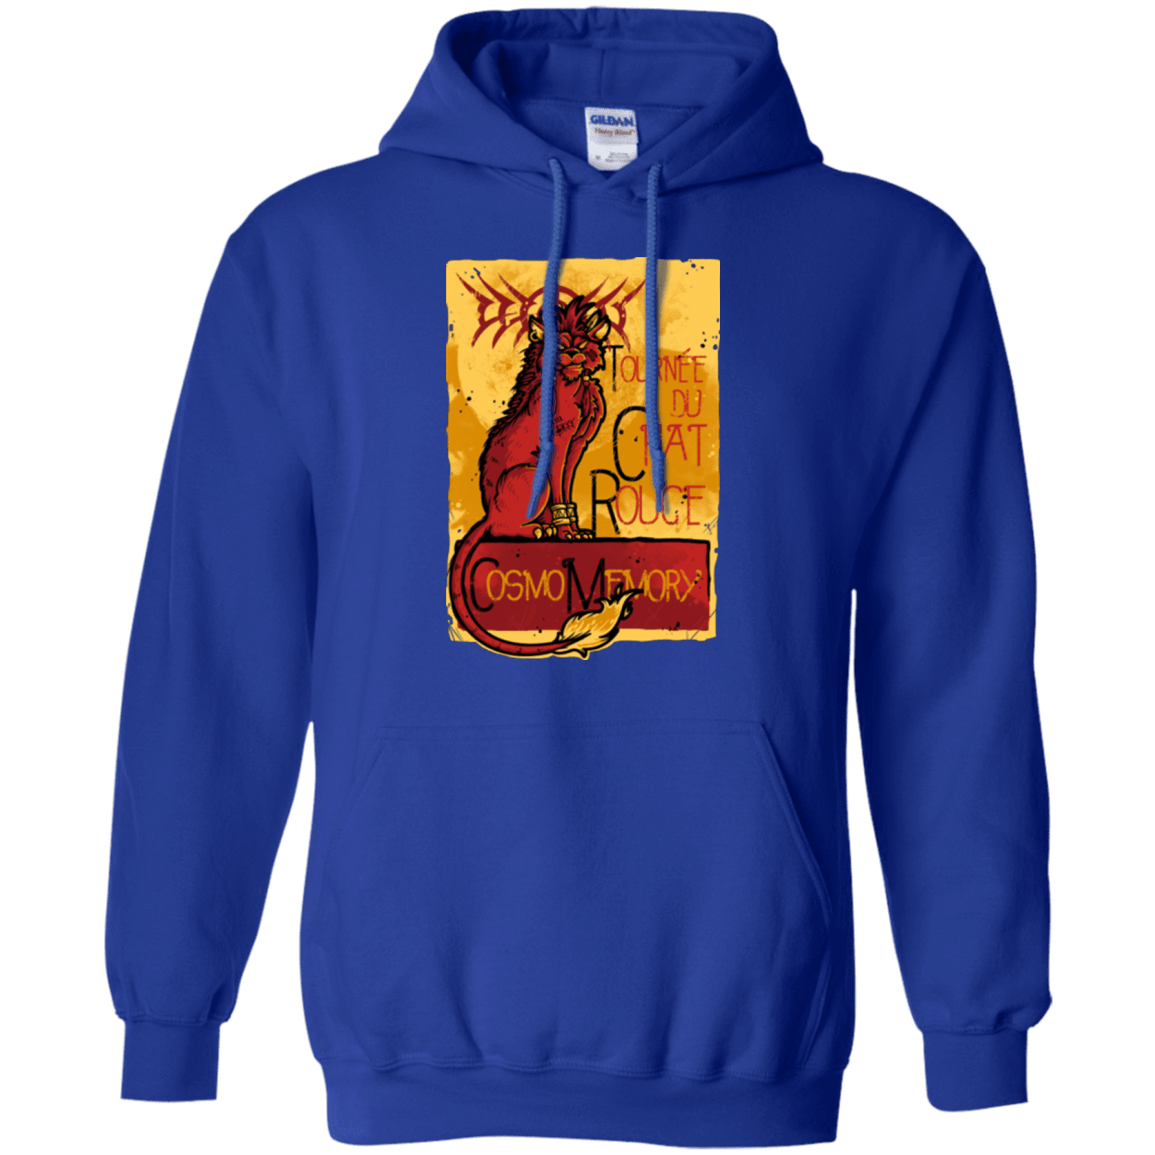 Sweatshirts Royal / Small LE CHAT ROUGE Pullover Hoodie